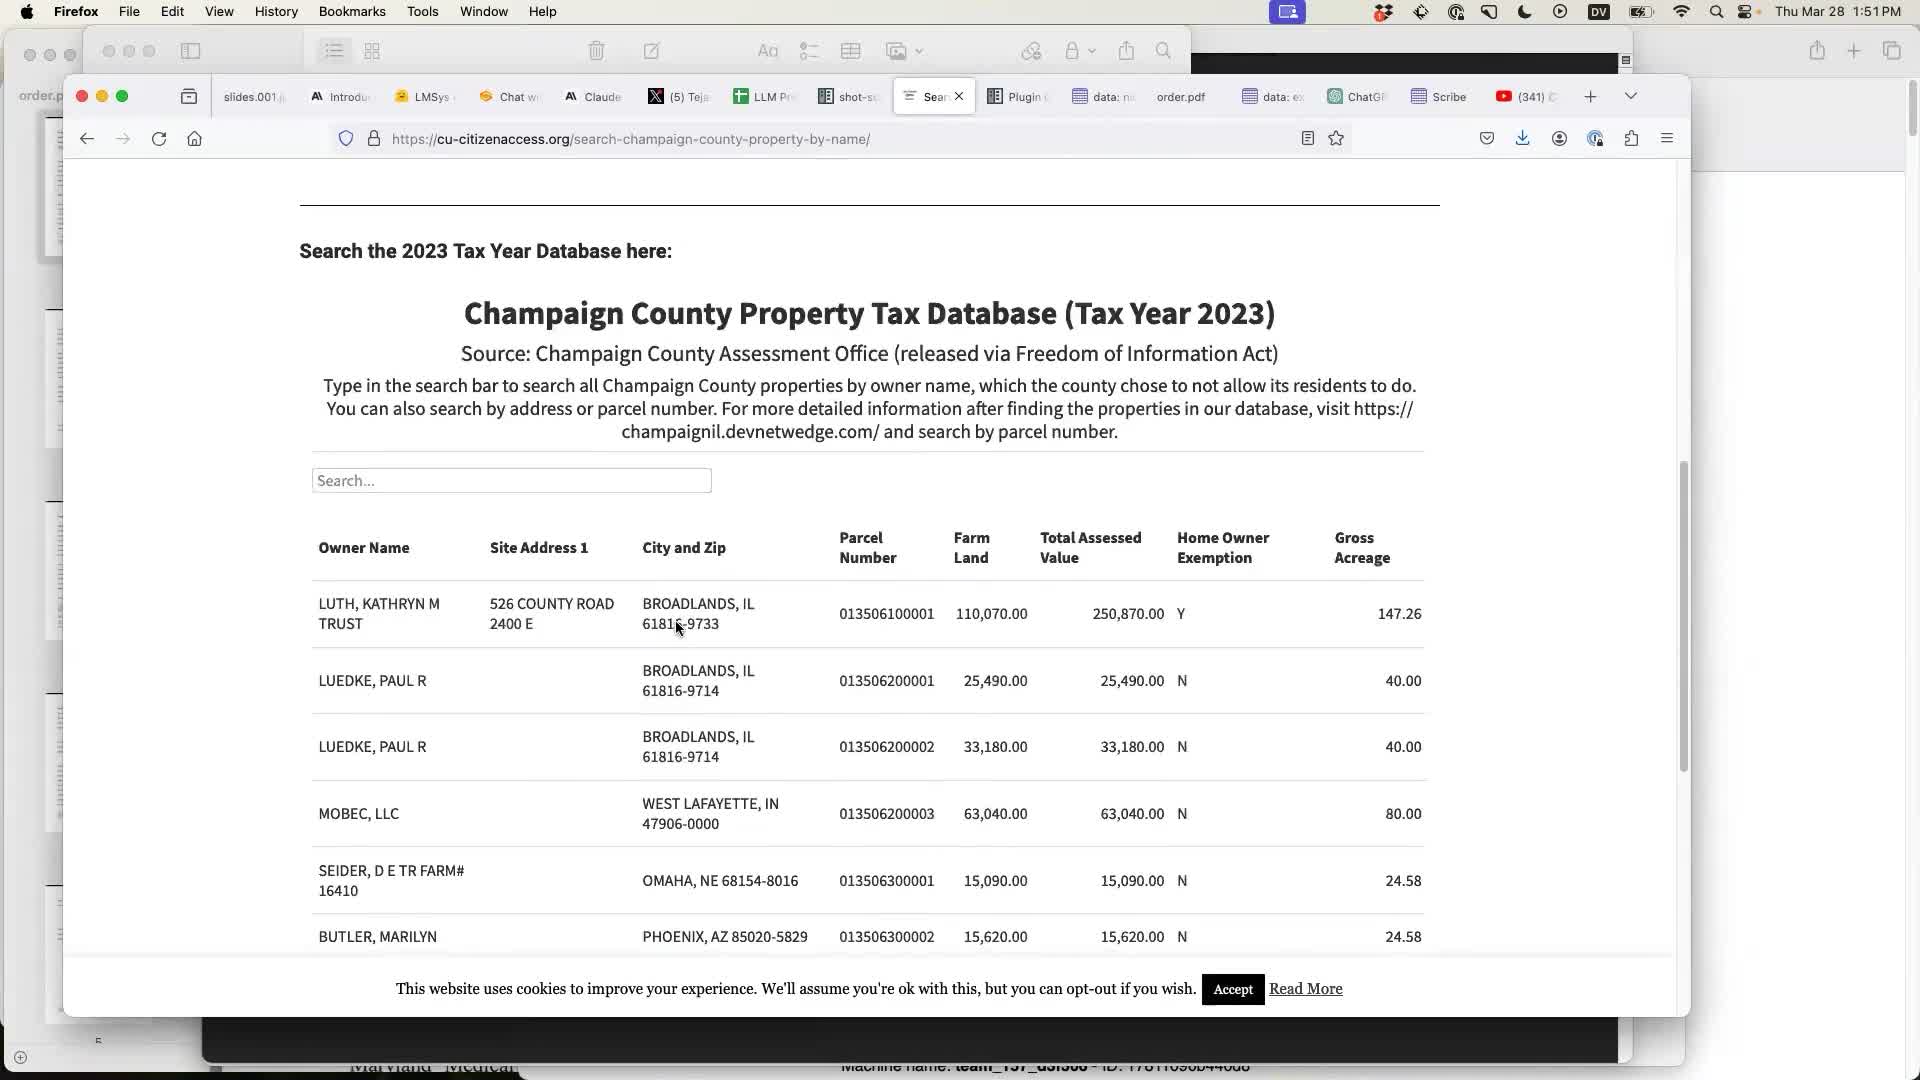 Champaign County Property Tax Database (Tax Year 2023) Source: Champaign County Assessment Office (released via Freedom of Information Act) Type in the search bar to search all Champaign County properties by owner name, which the county chose to not allow its residents to do.